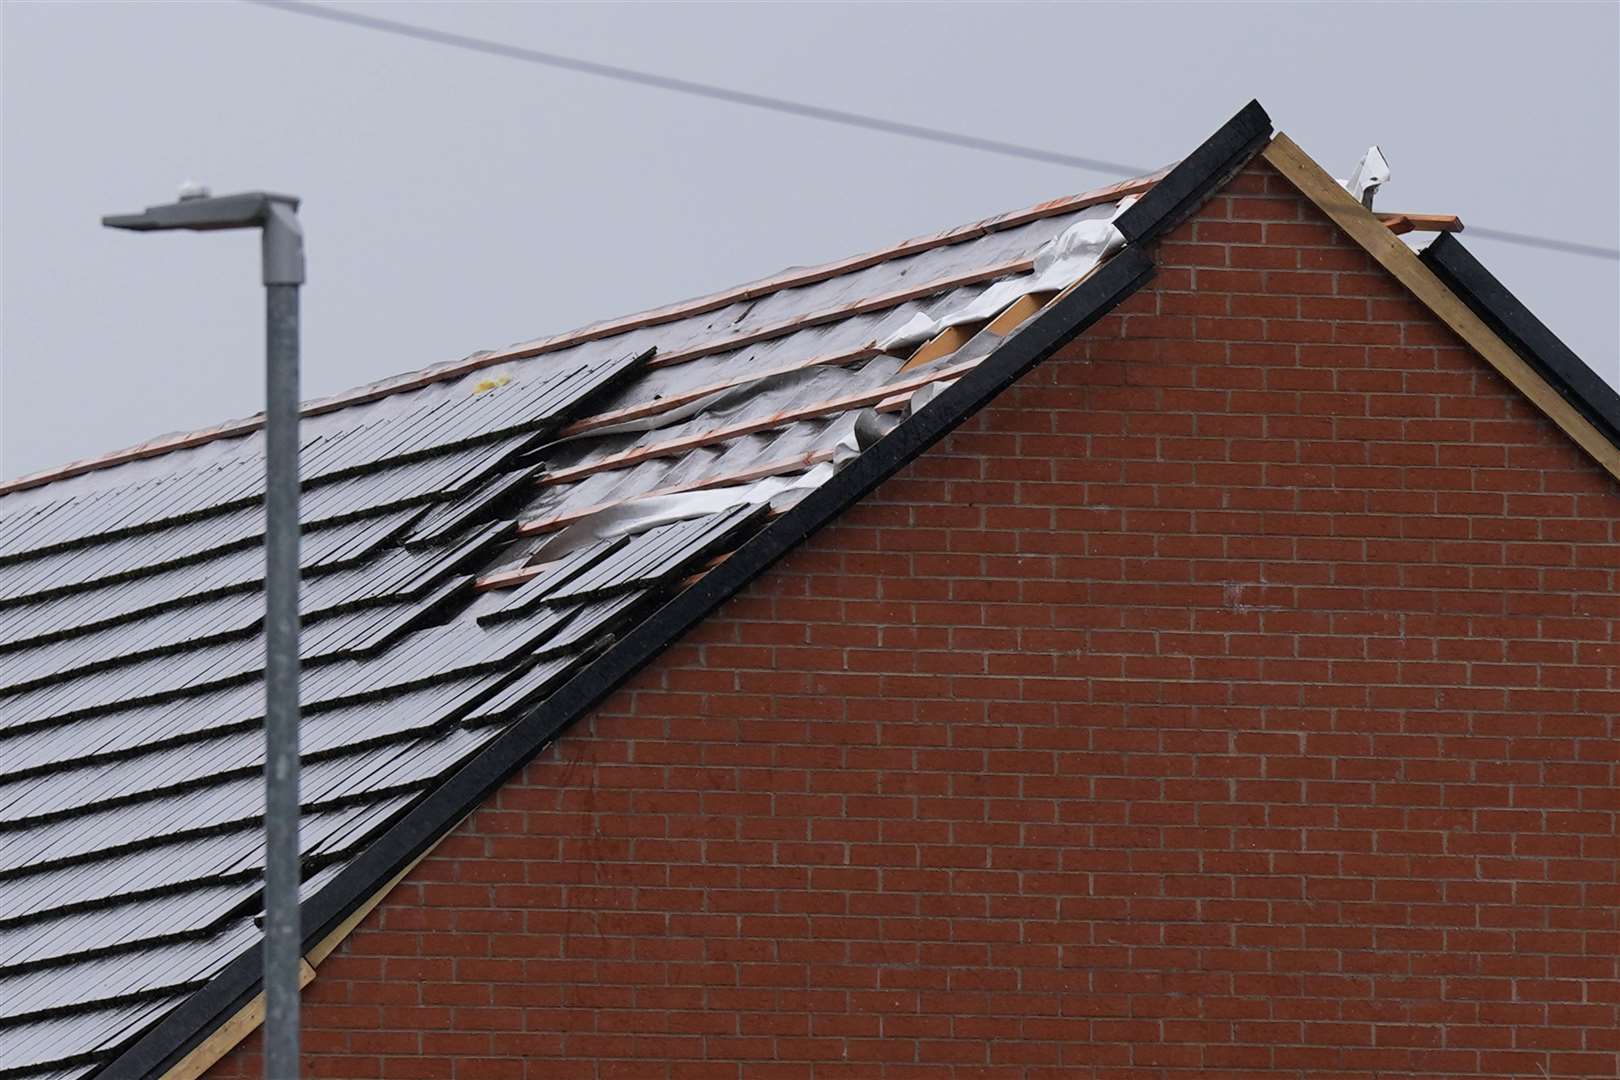 Tiles have been ripped off the roofs of some homes in St Giles Road, Knutton (Jacob King/PA)